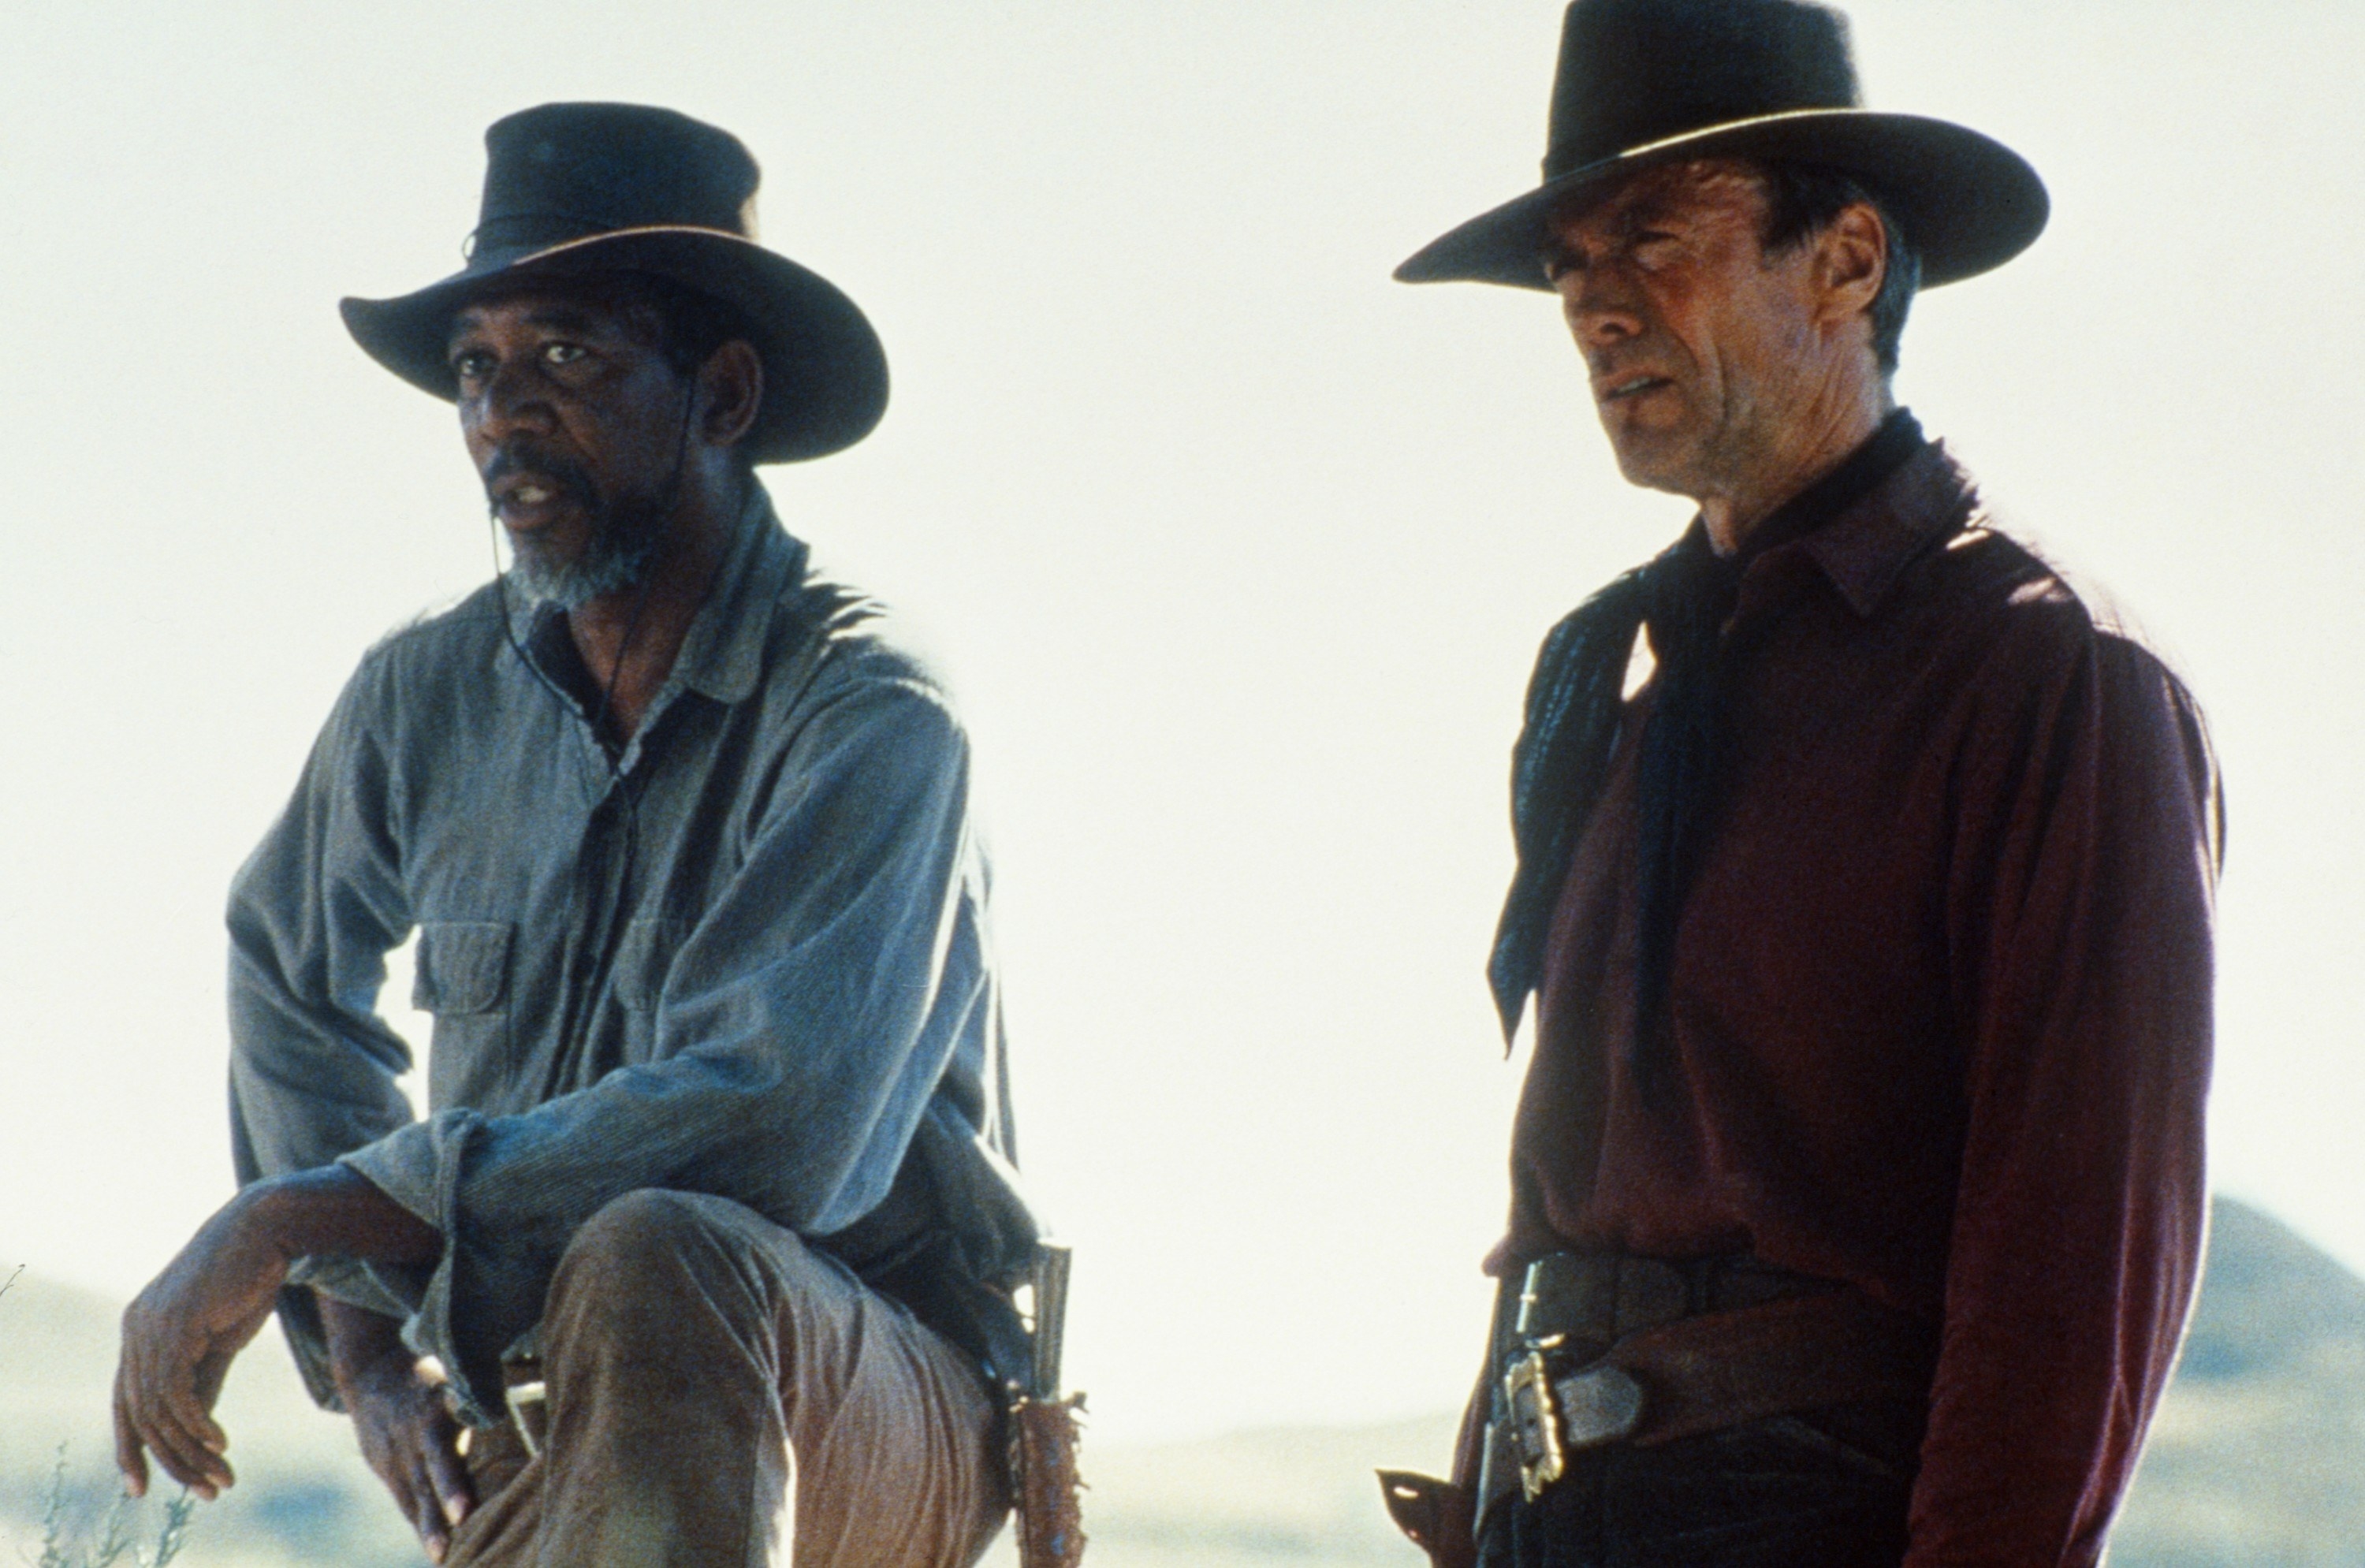 Morgan Freeman and Clint Eastwood wearing wide-brimmed hats